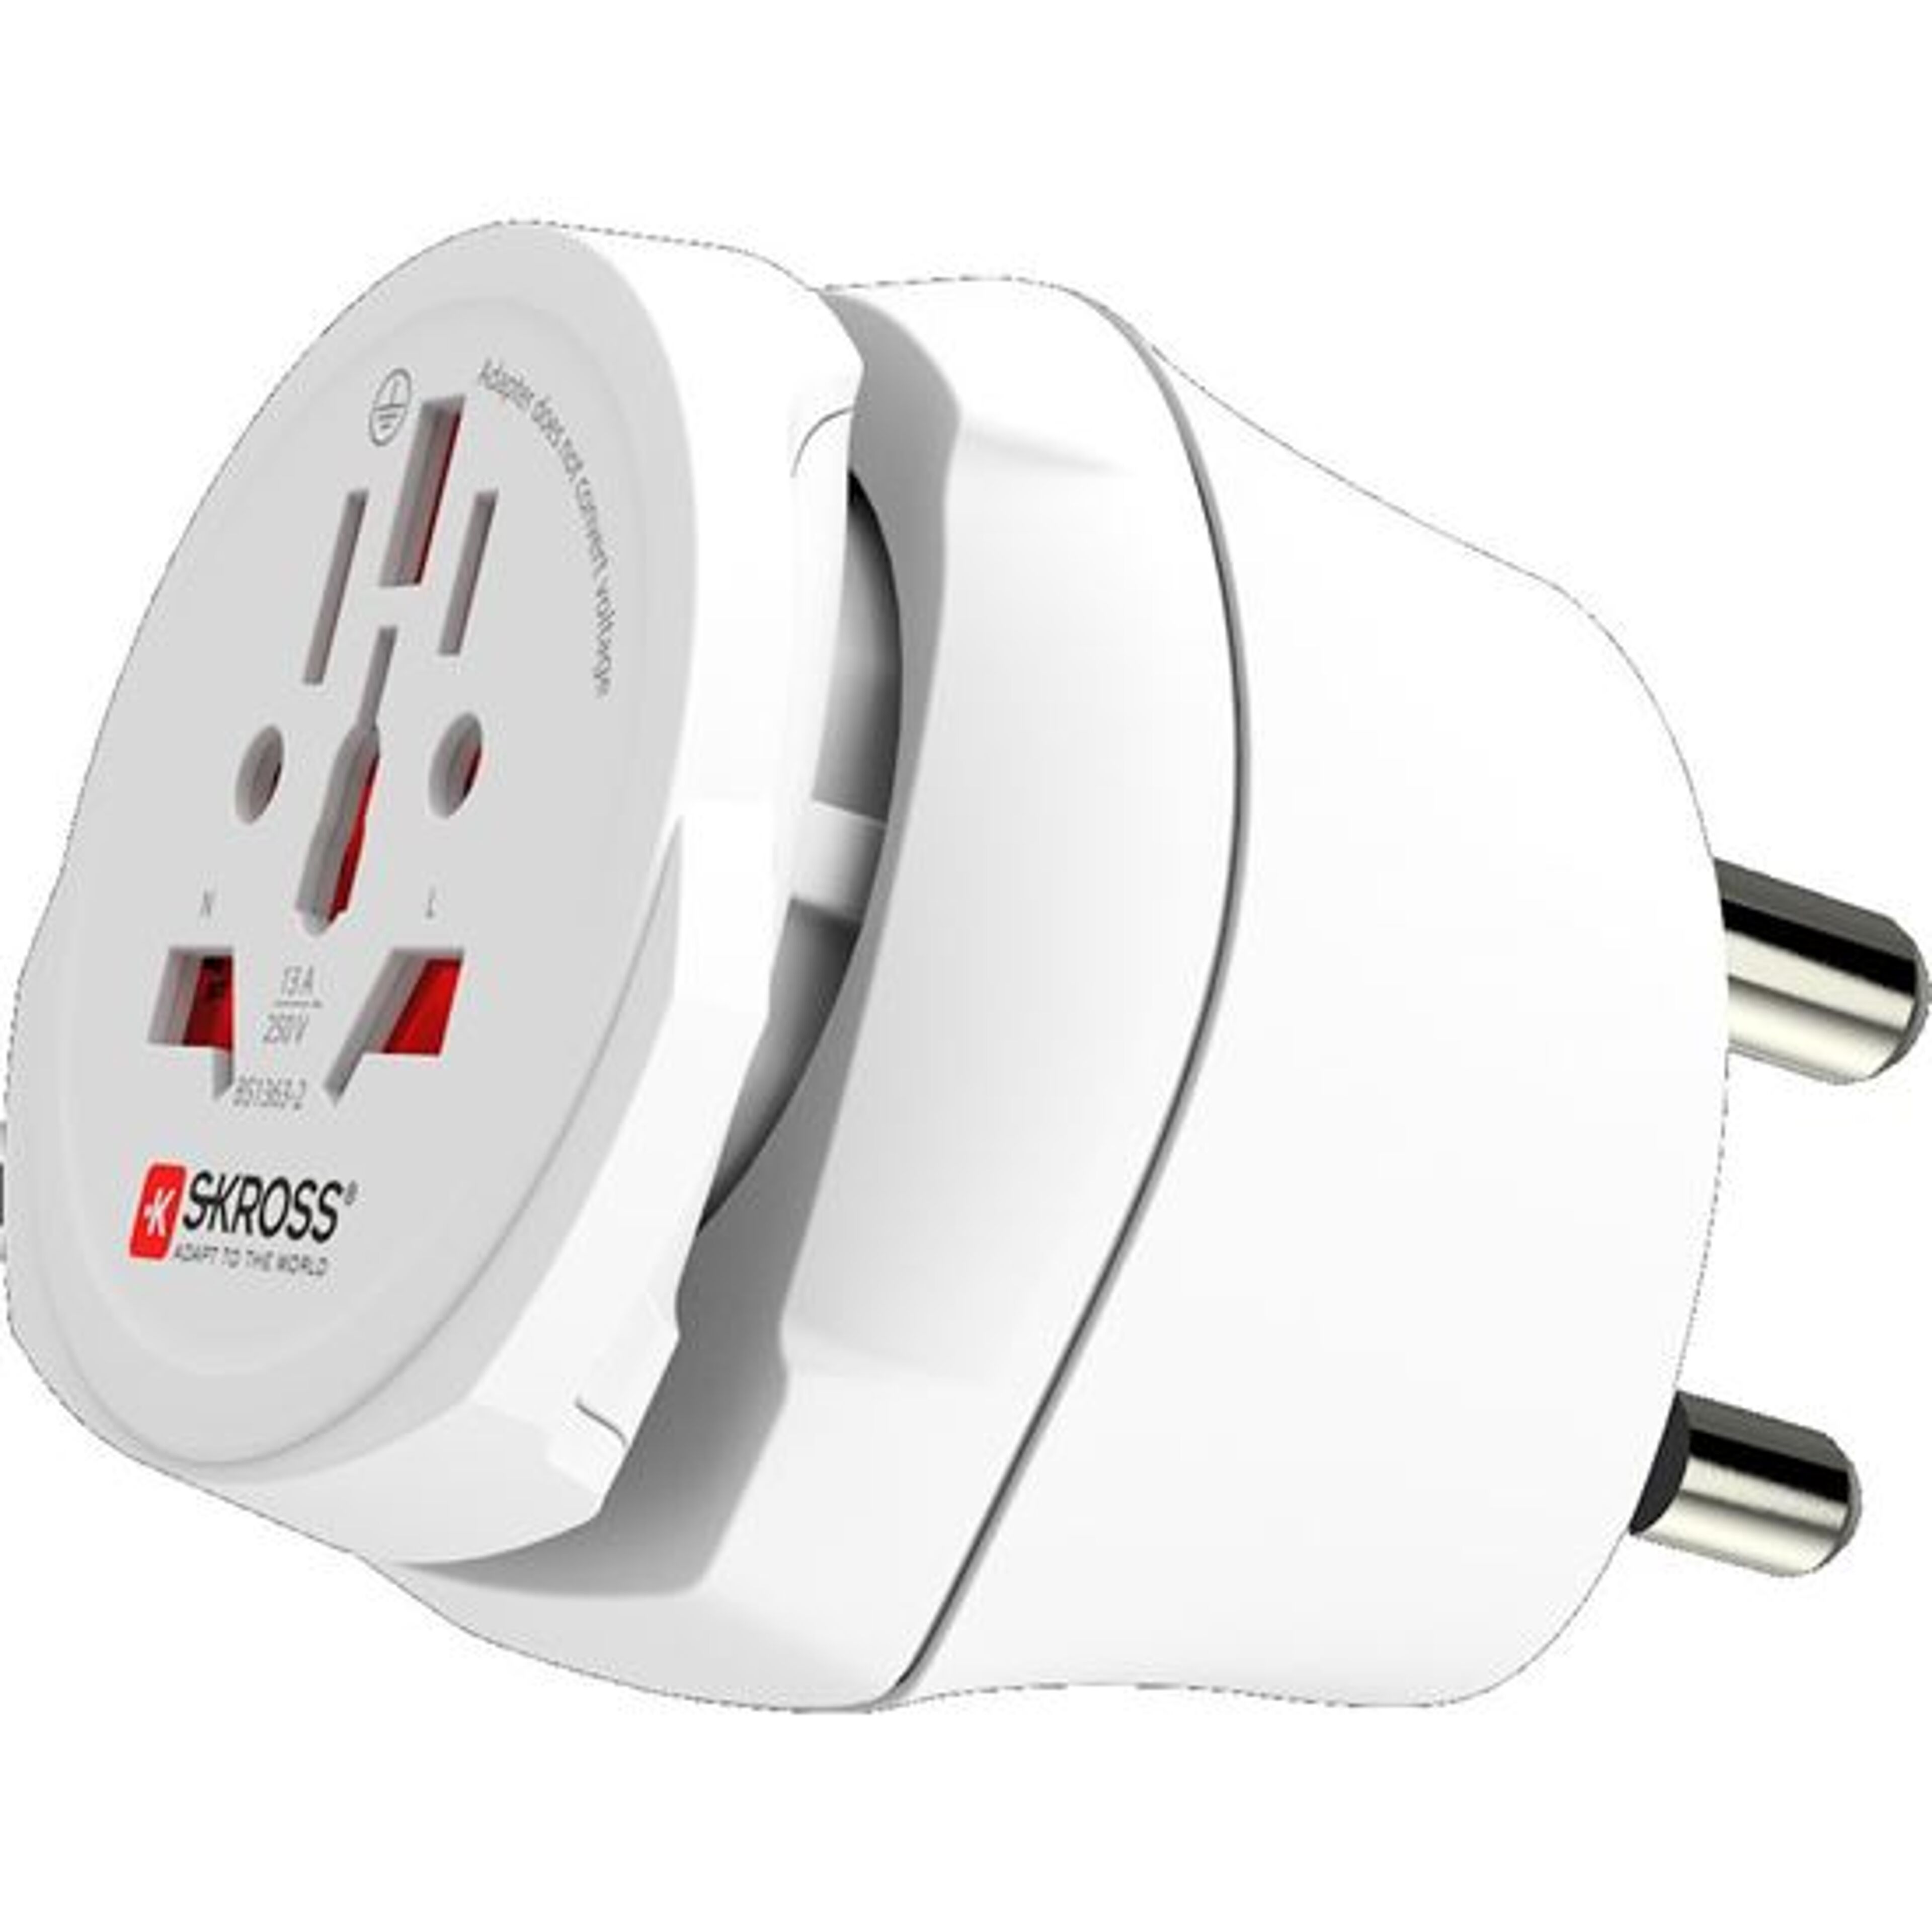 SKROSS South Africa & Europe, type M combo travel adapter